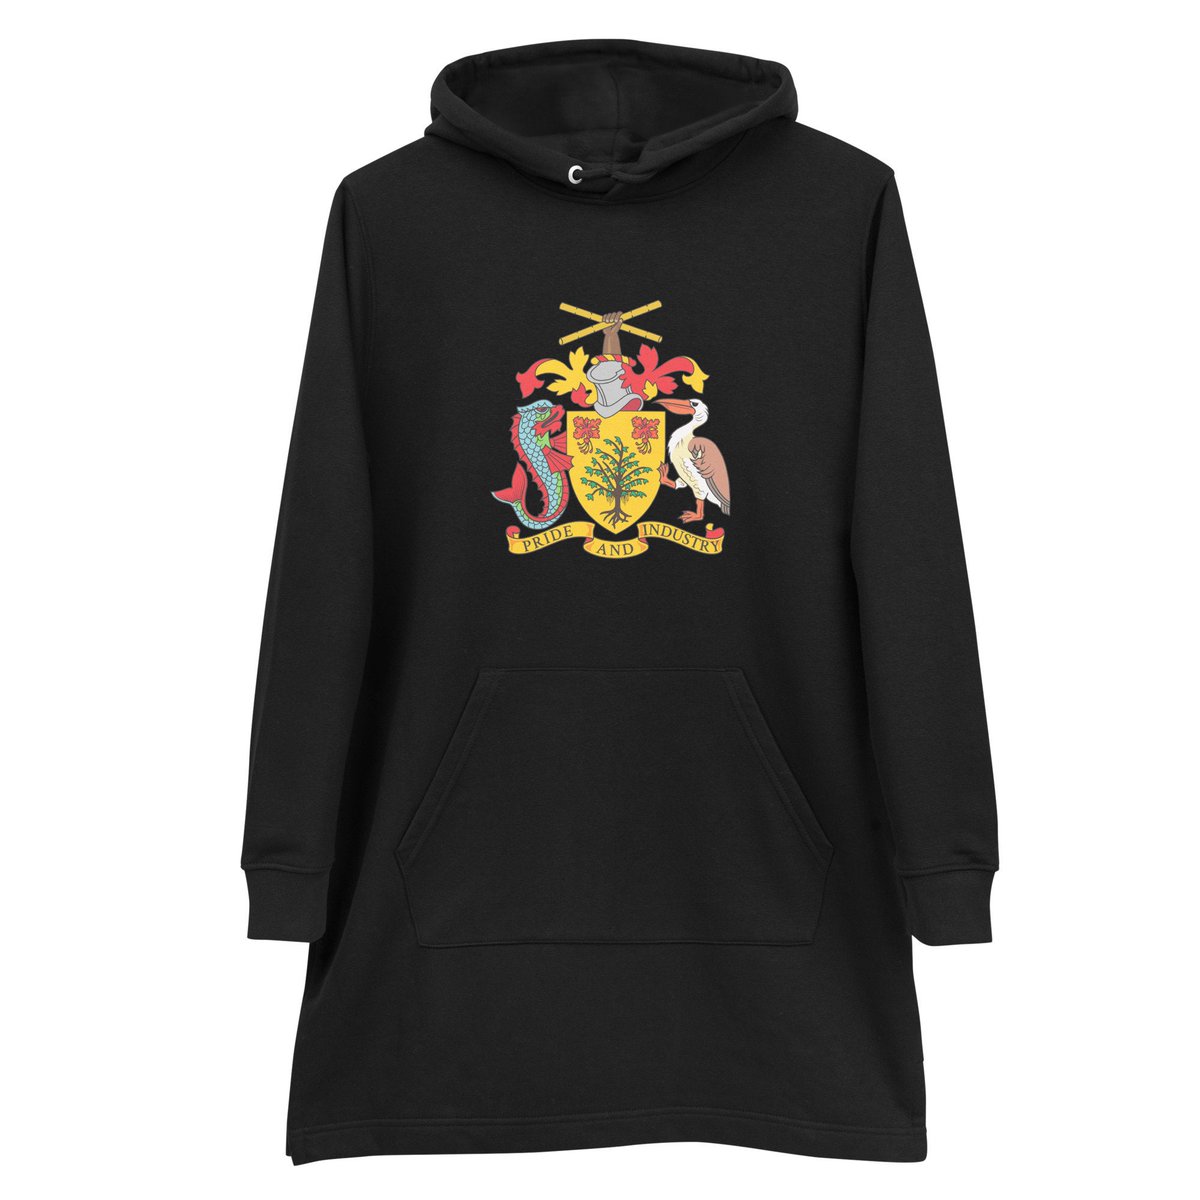 Excited to share the latest addition to my #etsy shop: Barbados court of arms Hoodie dress etsy.me/44bmpPo #barbados #bajan #reggae #soca #giftformom #giftforher #giftforwife #weddinggift #babyshower